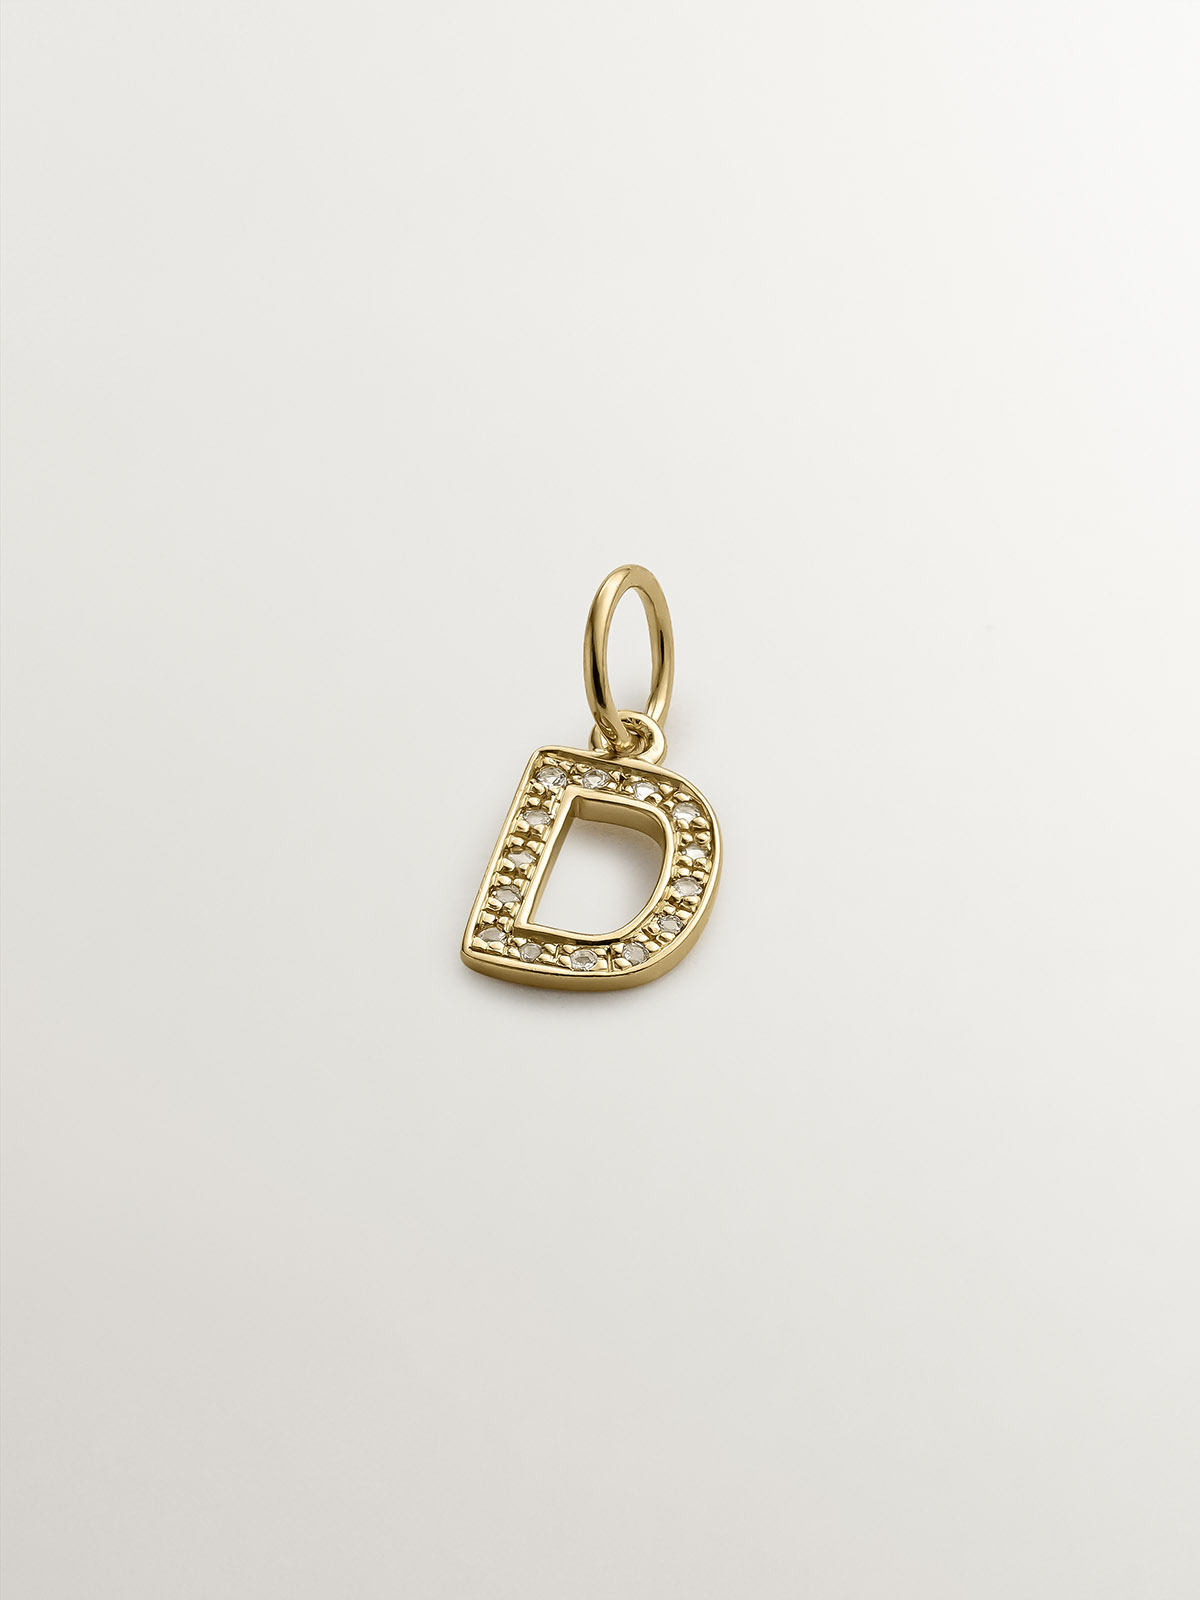 D initial charm made of 925 silver bathed in 18K yellow gold and white topaz.